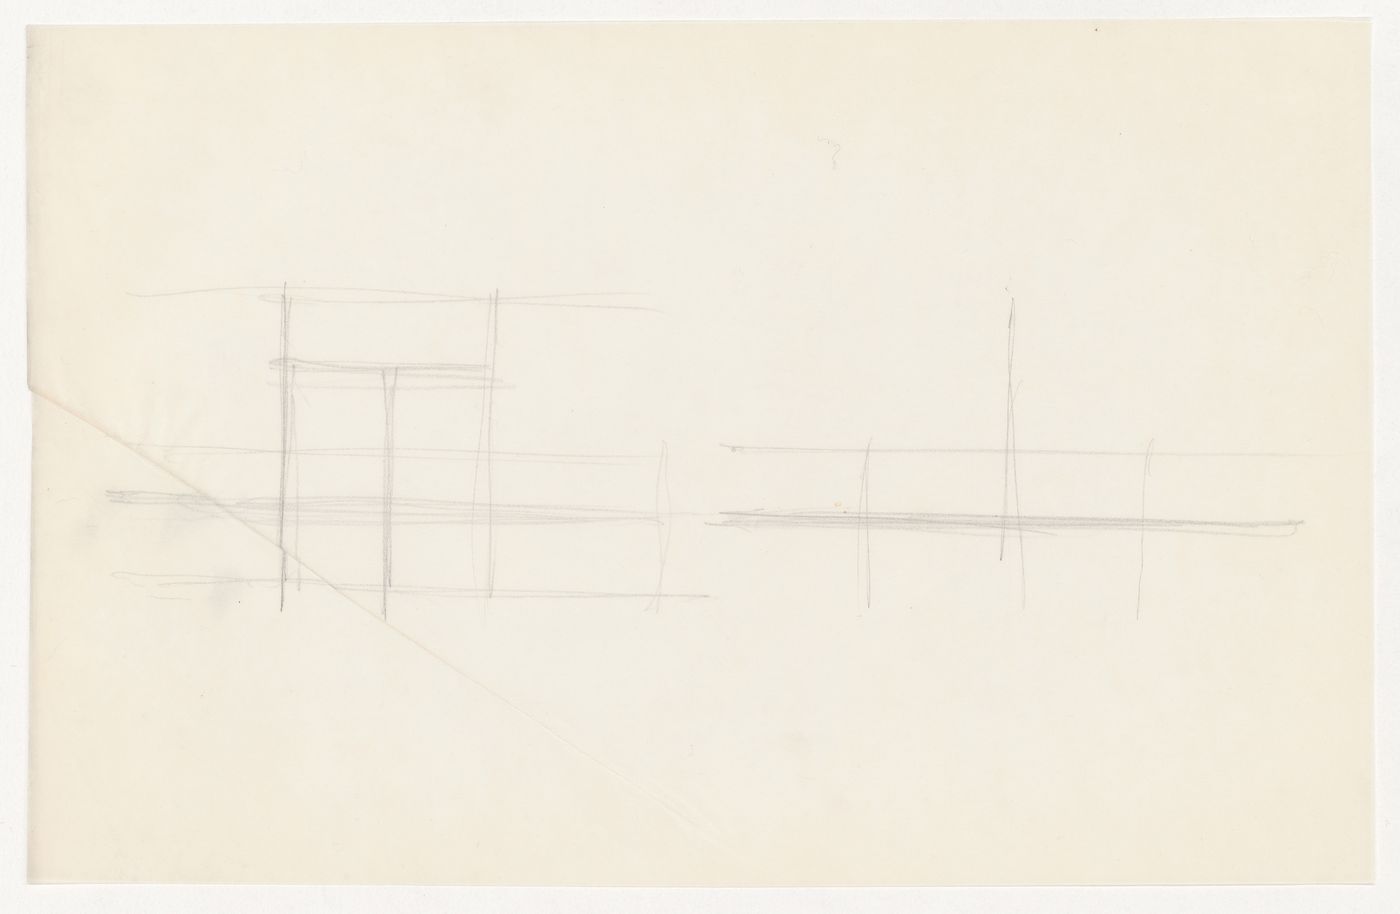 Partial sketch elevations for the entrance for the Metallurgy Building, Illinois Institute of Technology, Chicago